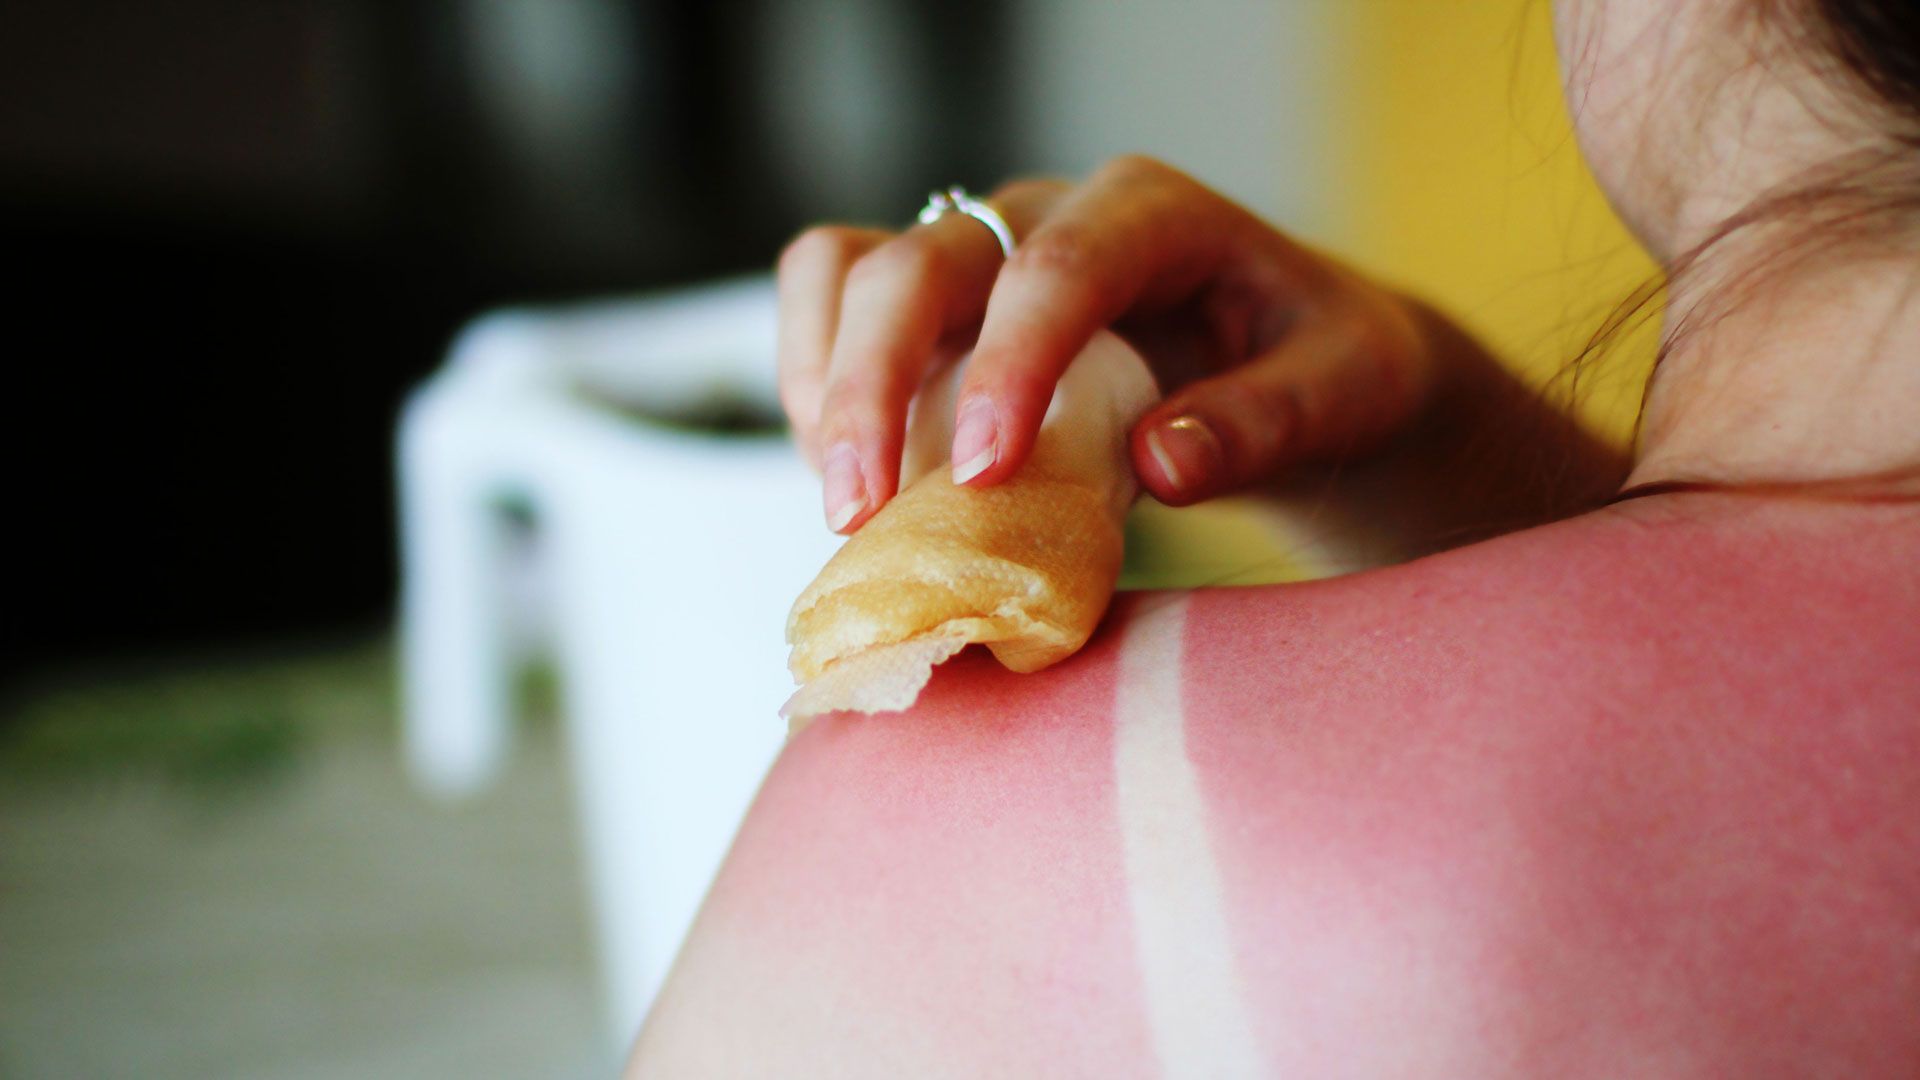 How to Treat Sunburn Naturally - Natural Remedies to Soothe Sunburn